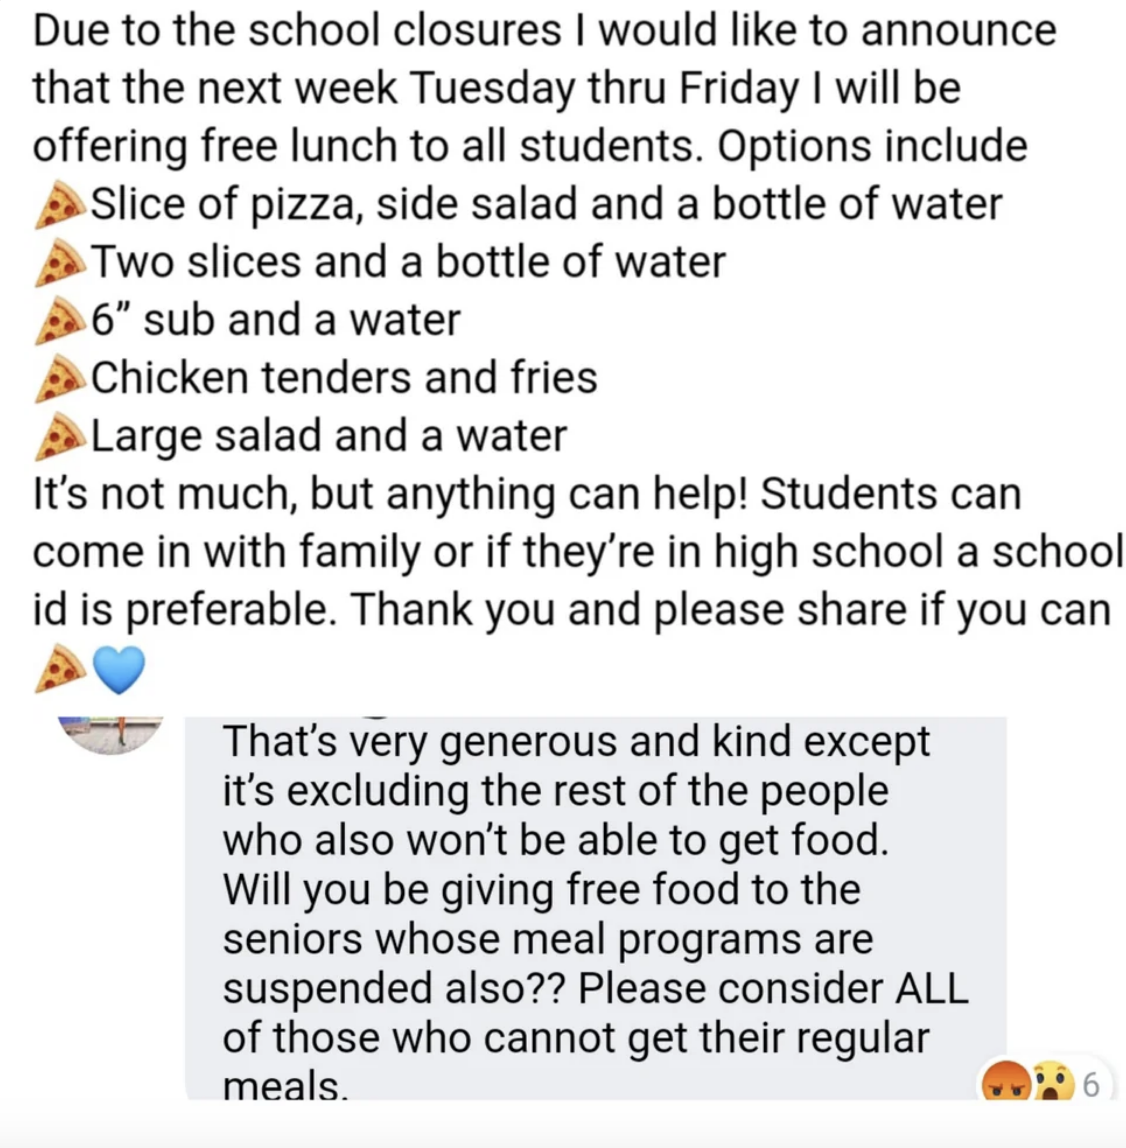 &quot;it&#x27;s excluding the rest of the people who also won&#x27;t be able to get food.&quot;